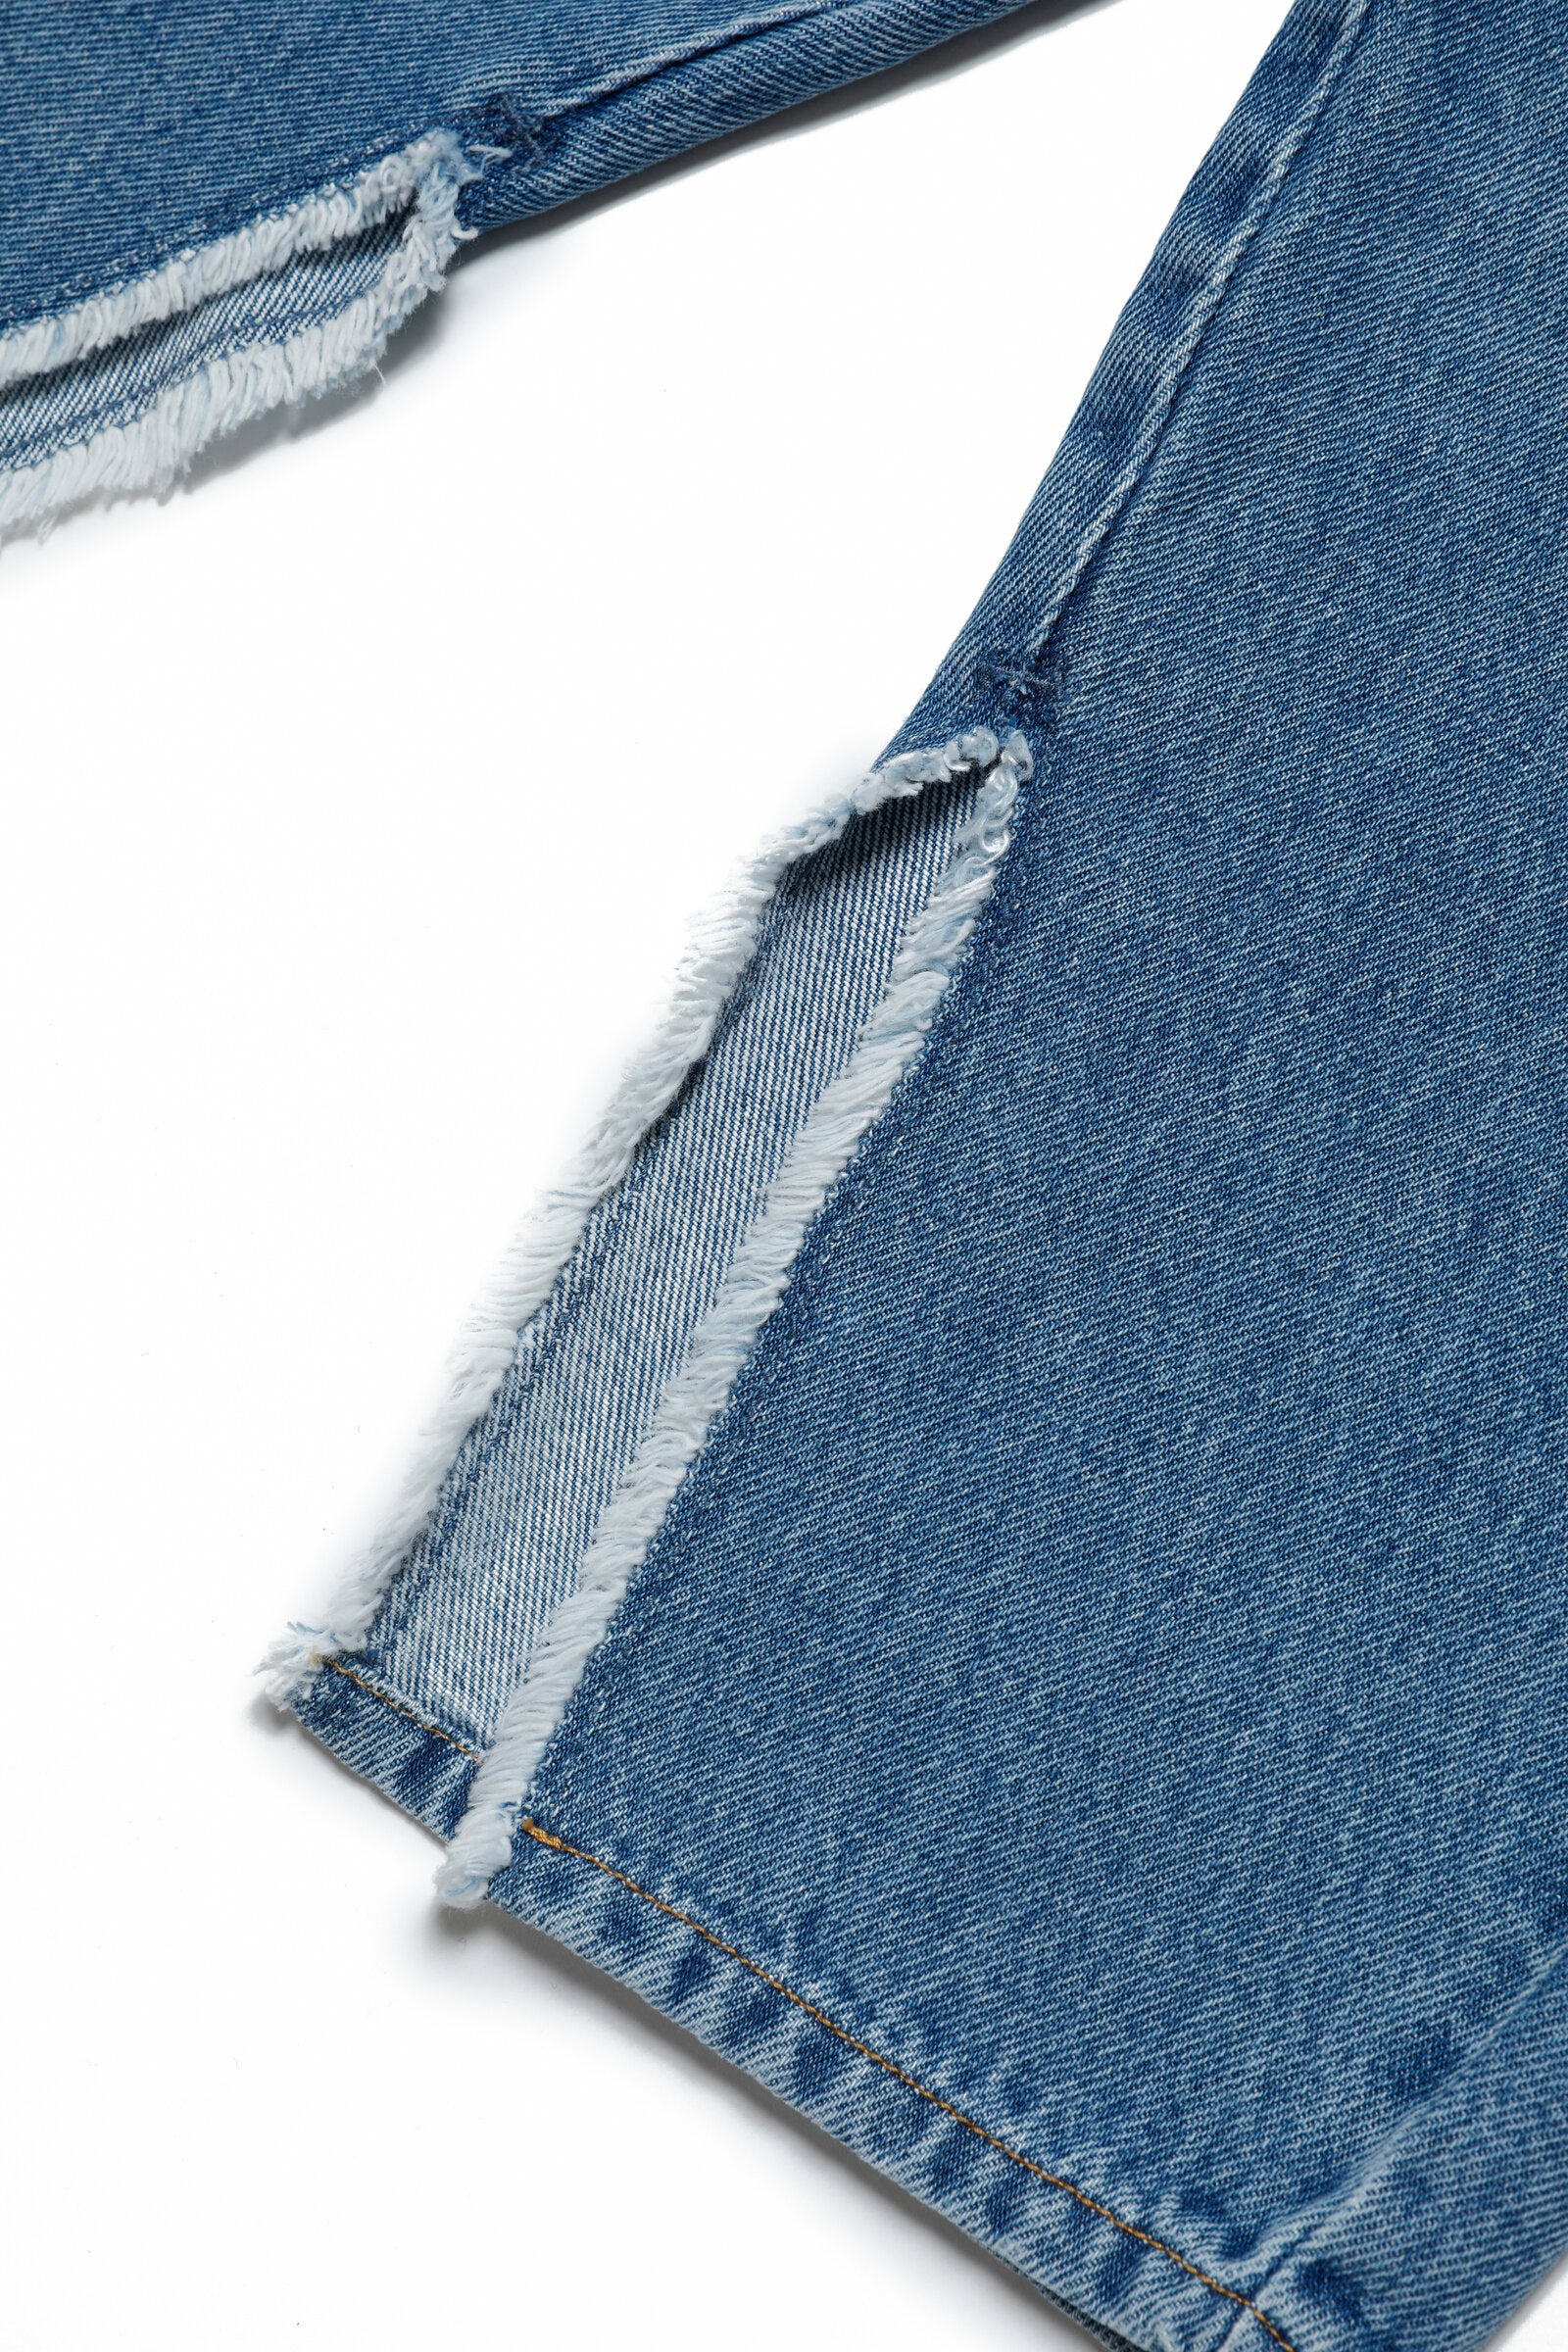 Medium blue shaded wide fit jeans